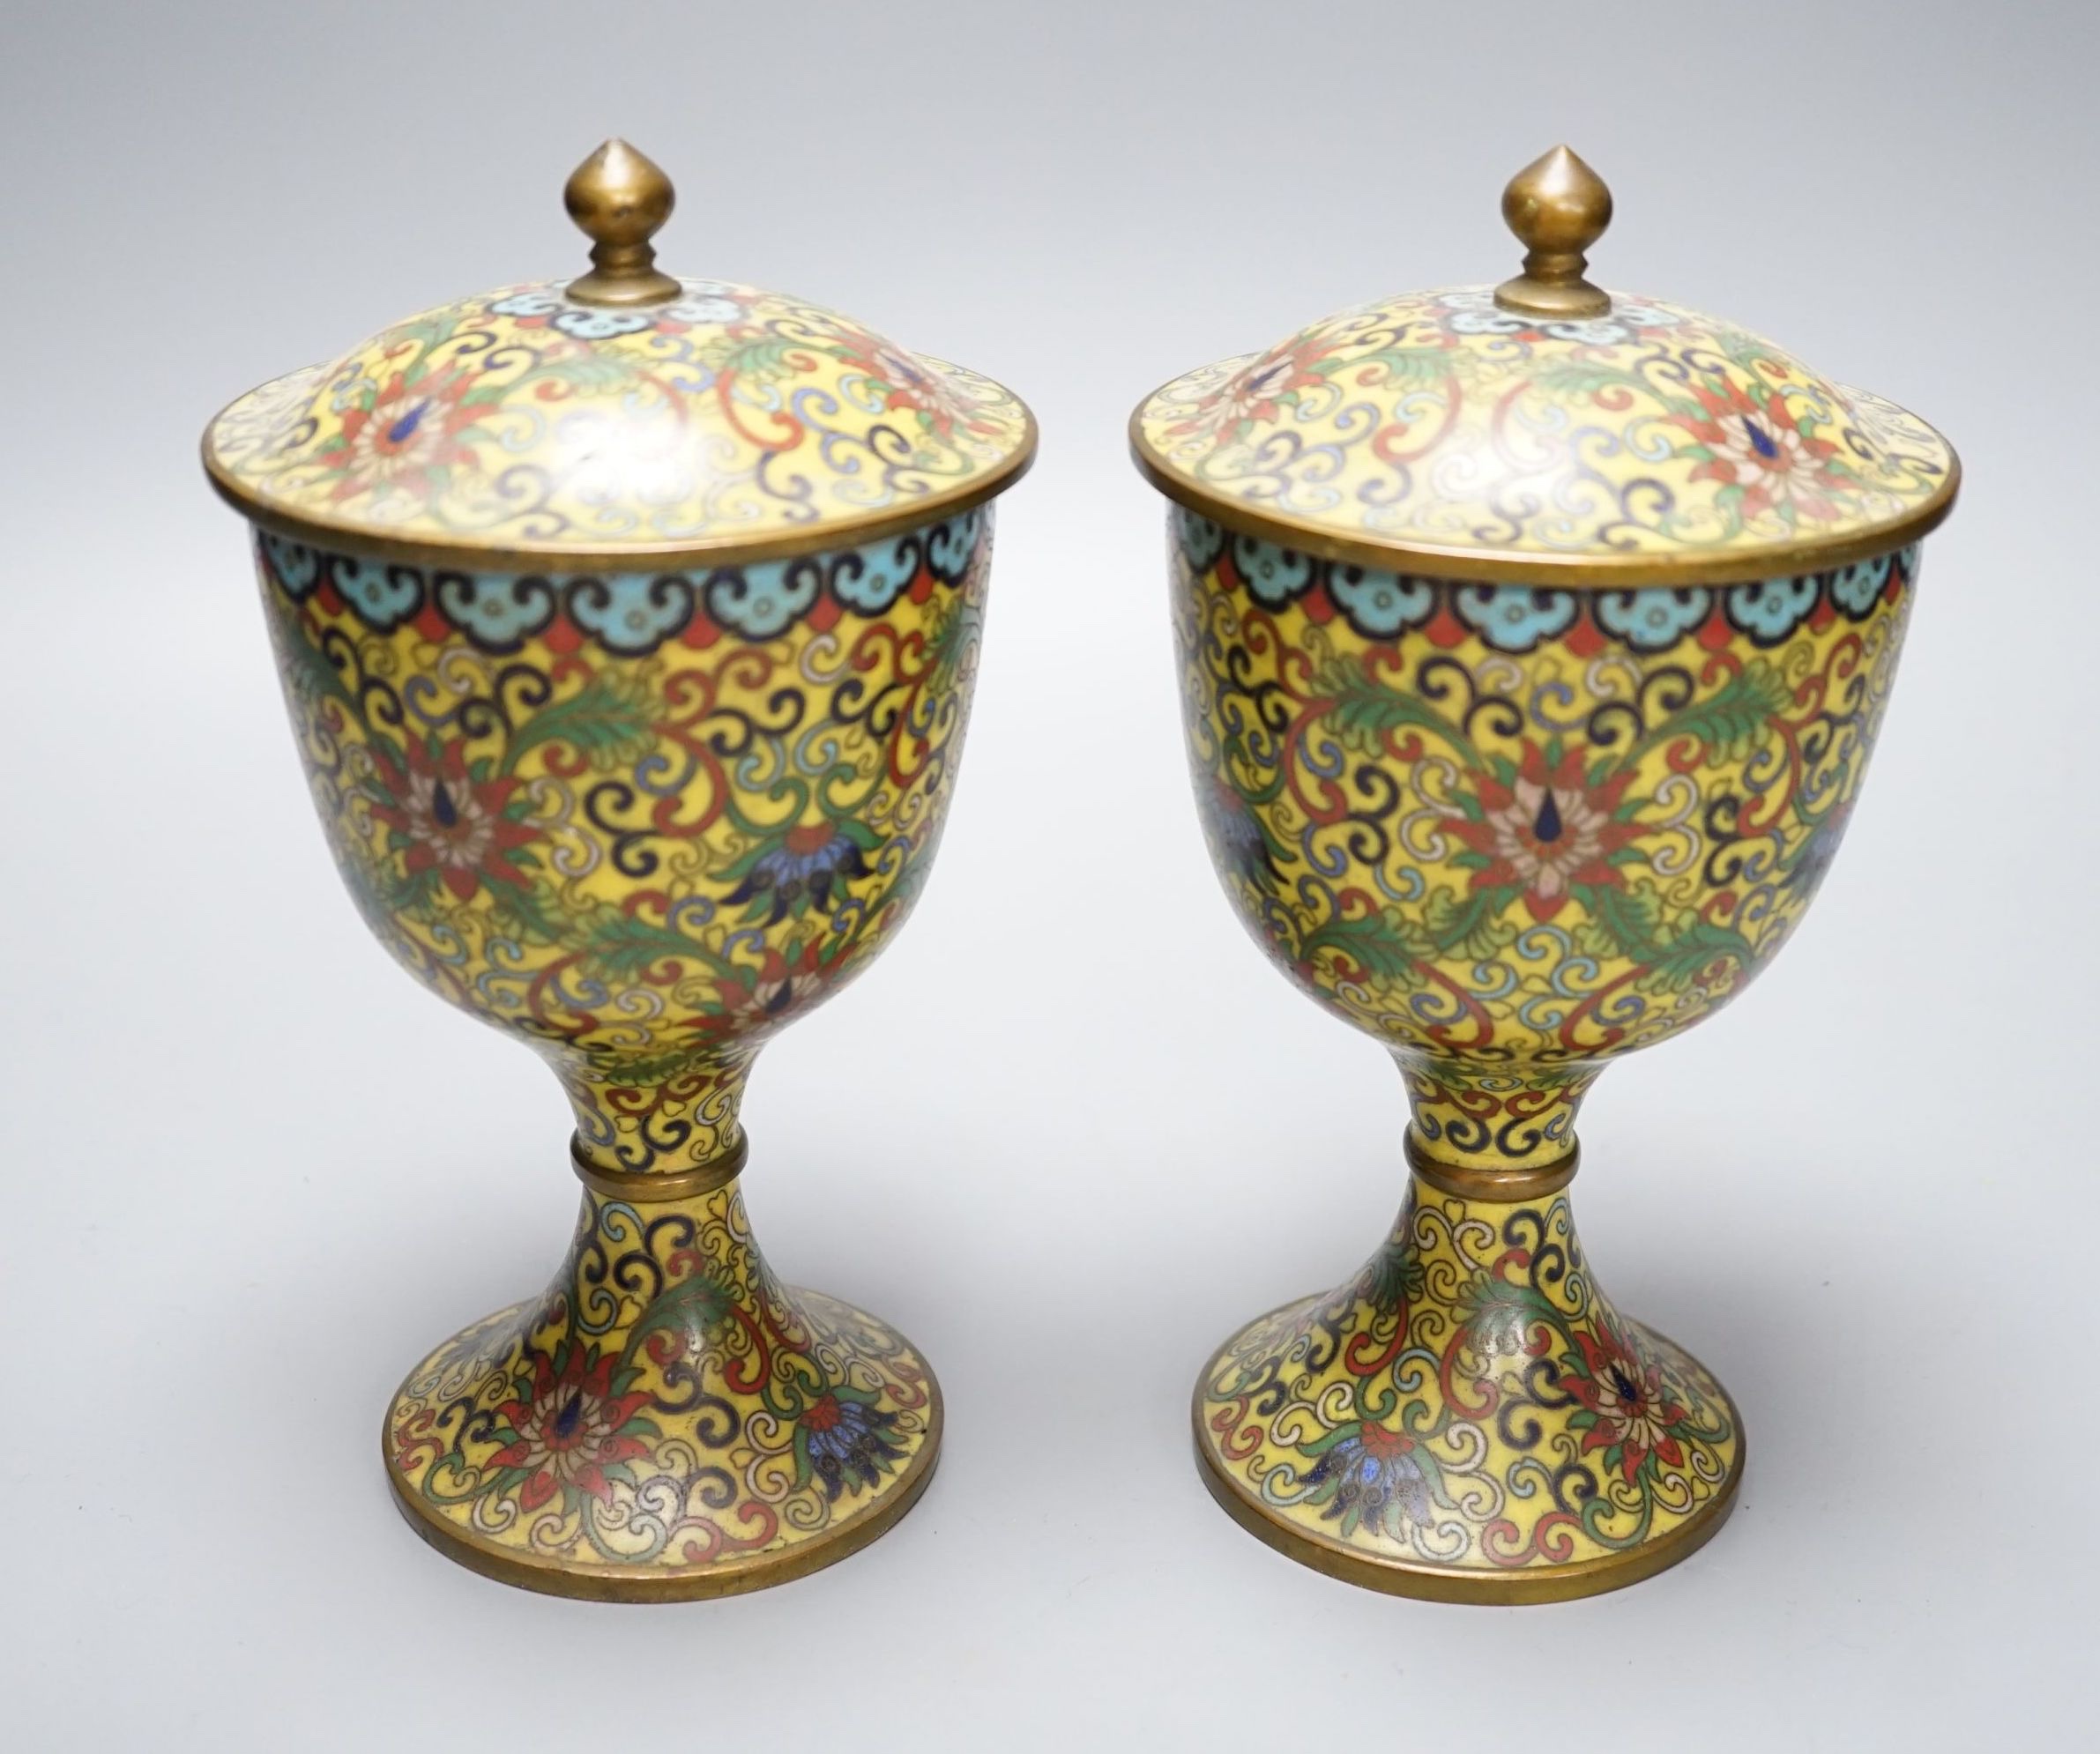 A pair of decorative cloisonné goblets and covers - 22.5cm high